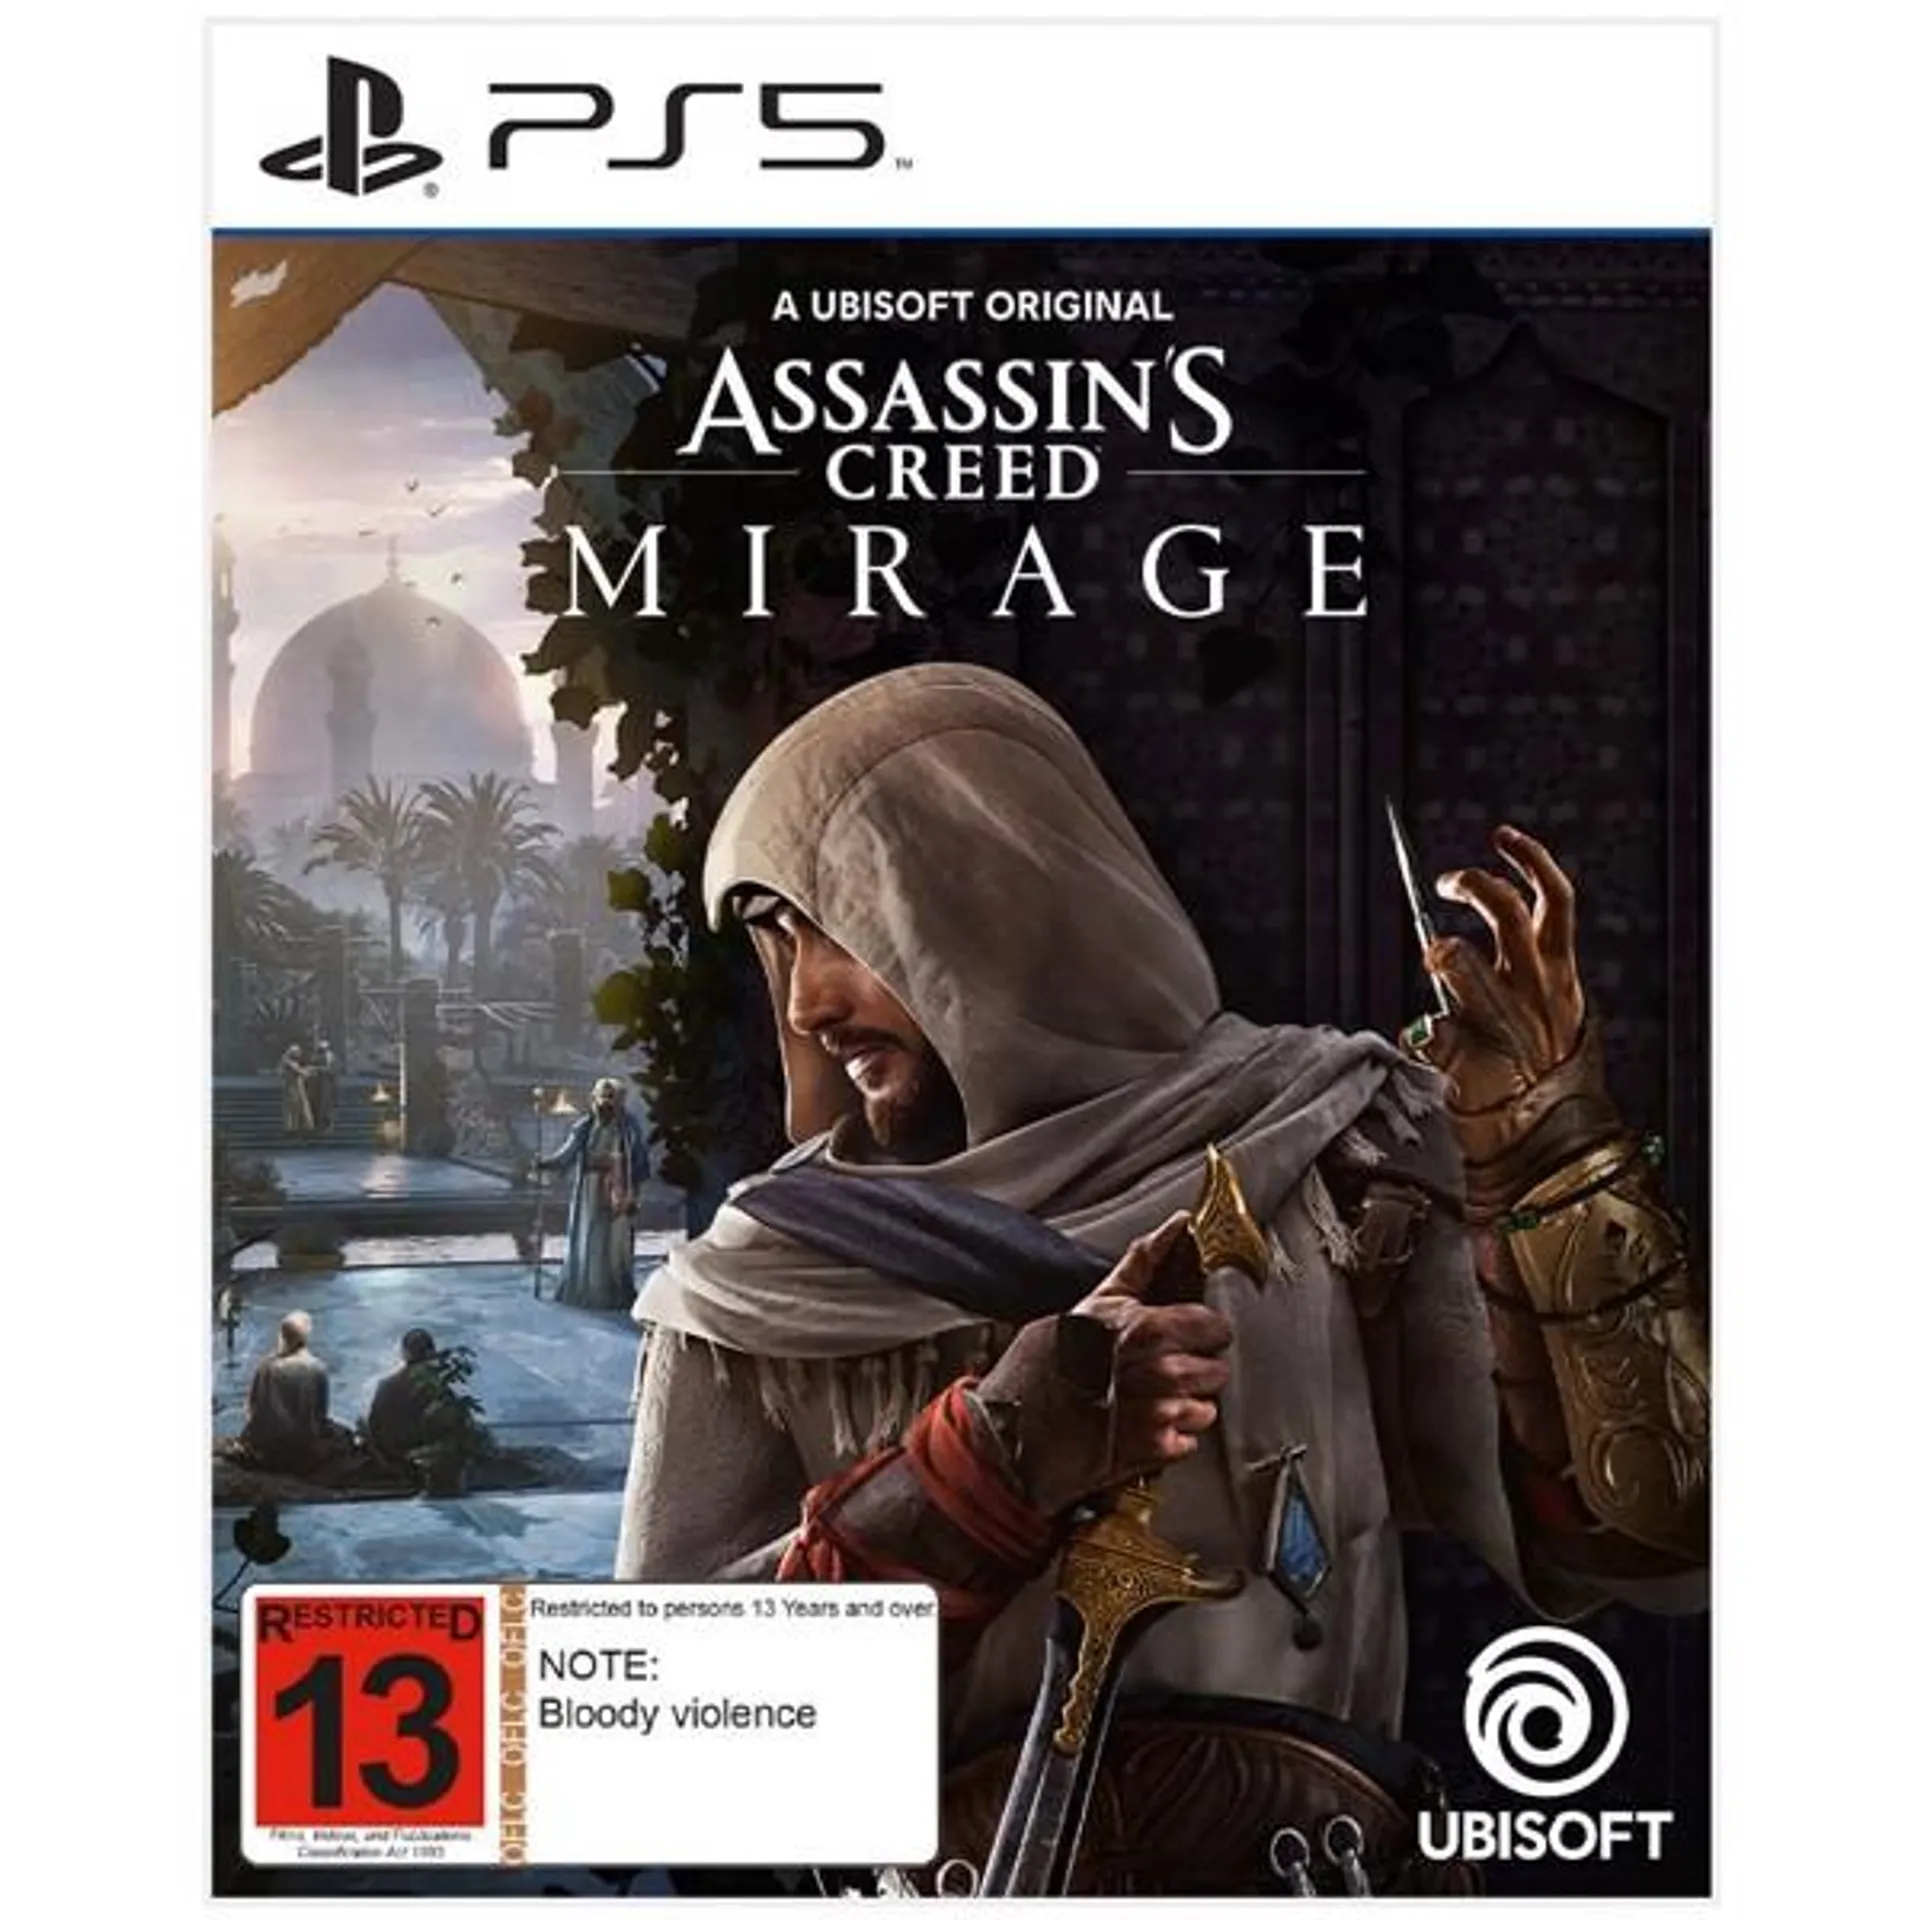 Assassin's Creed: Mirage (preowned)